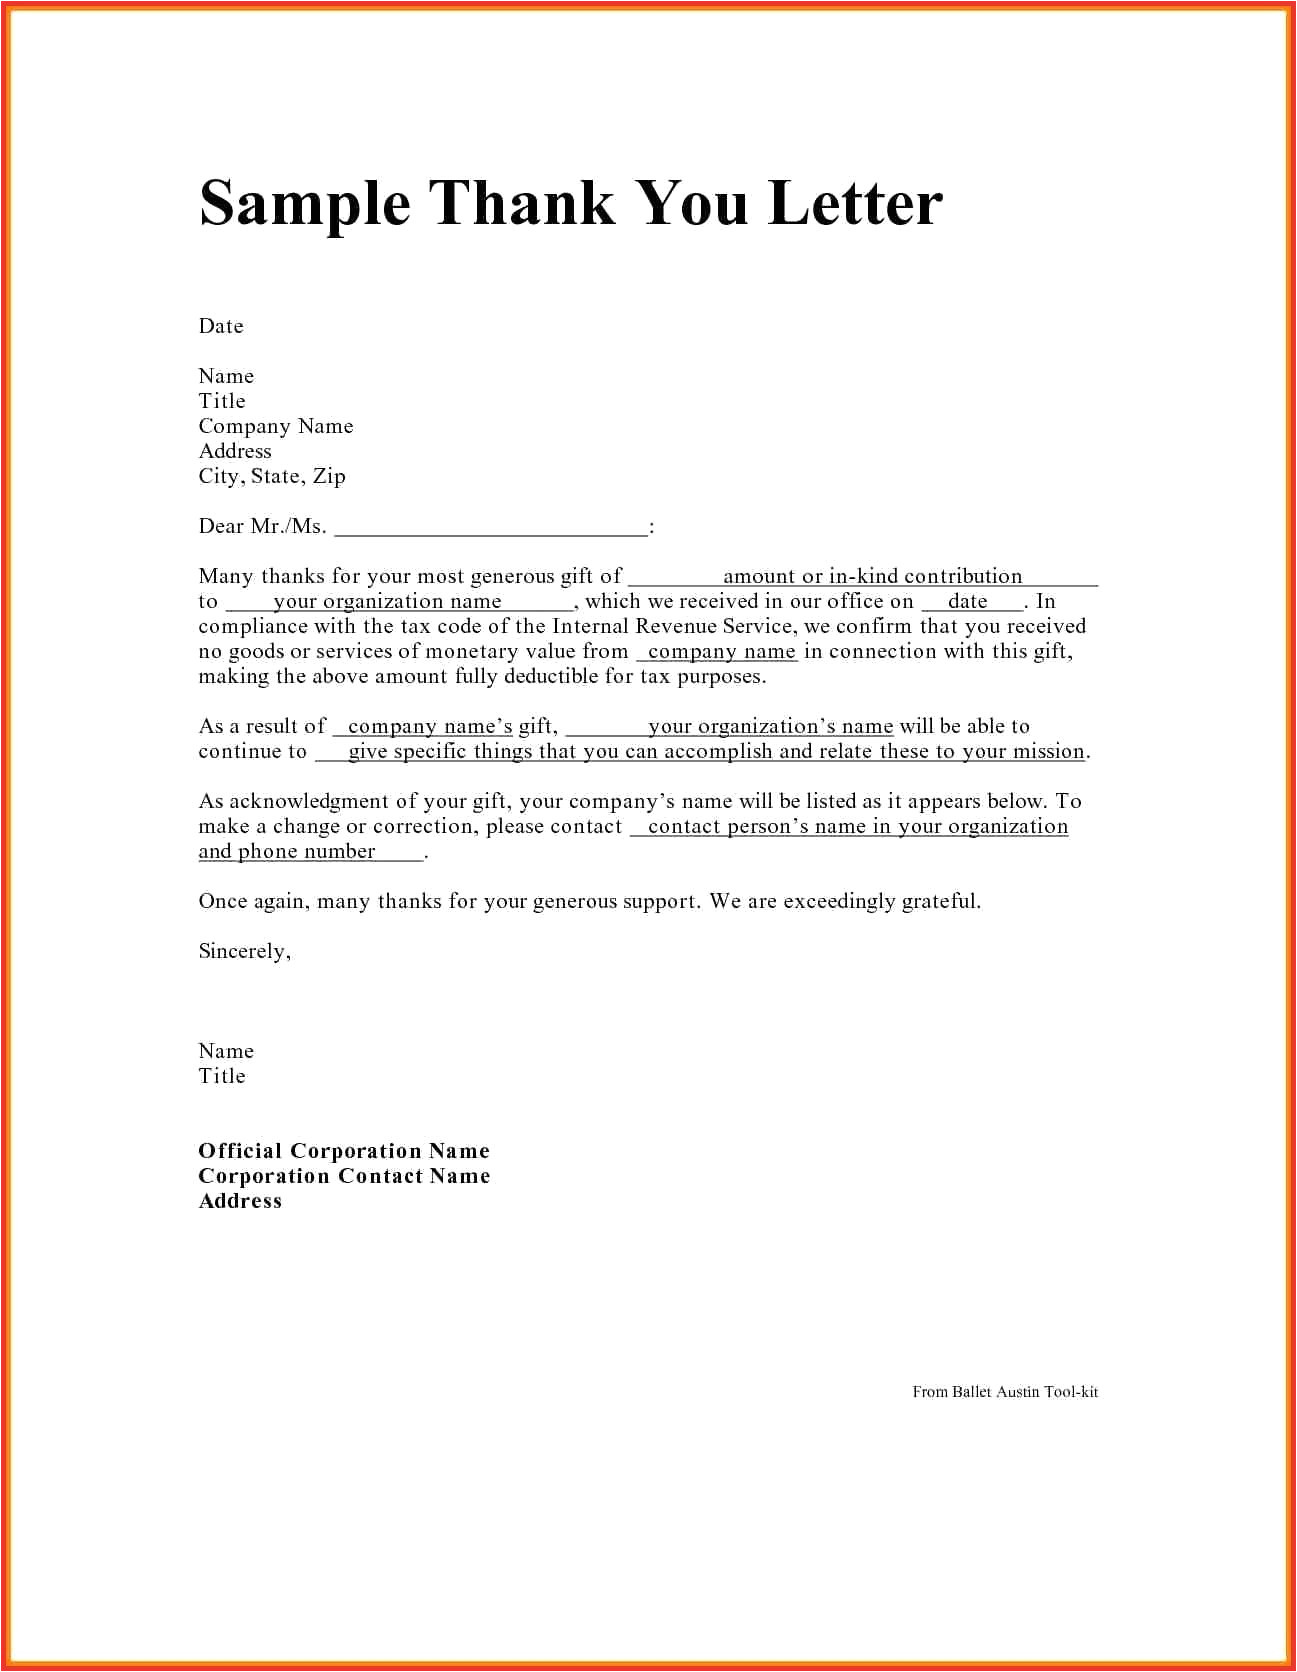 mis sold pension letter template 6